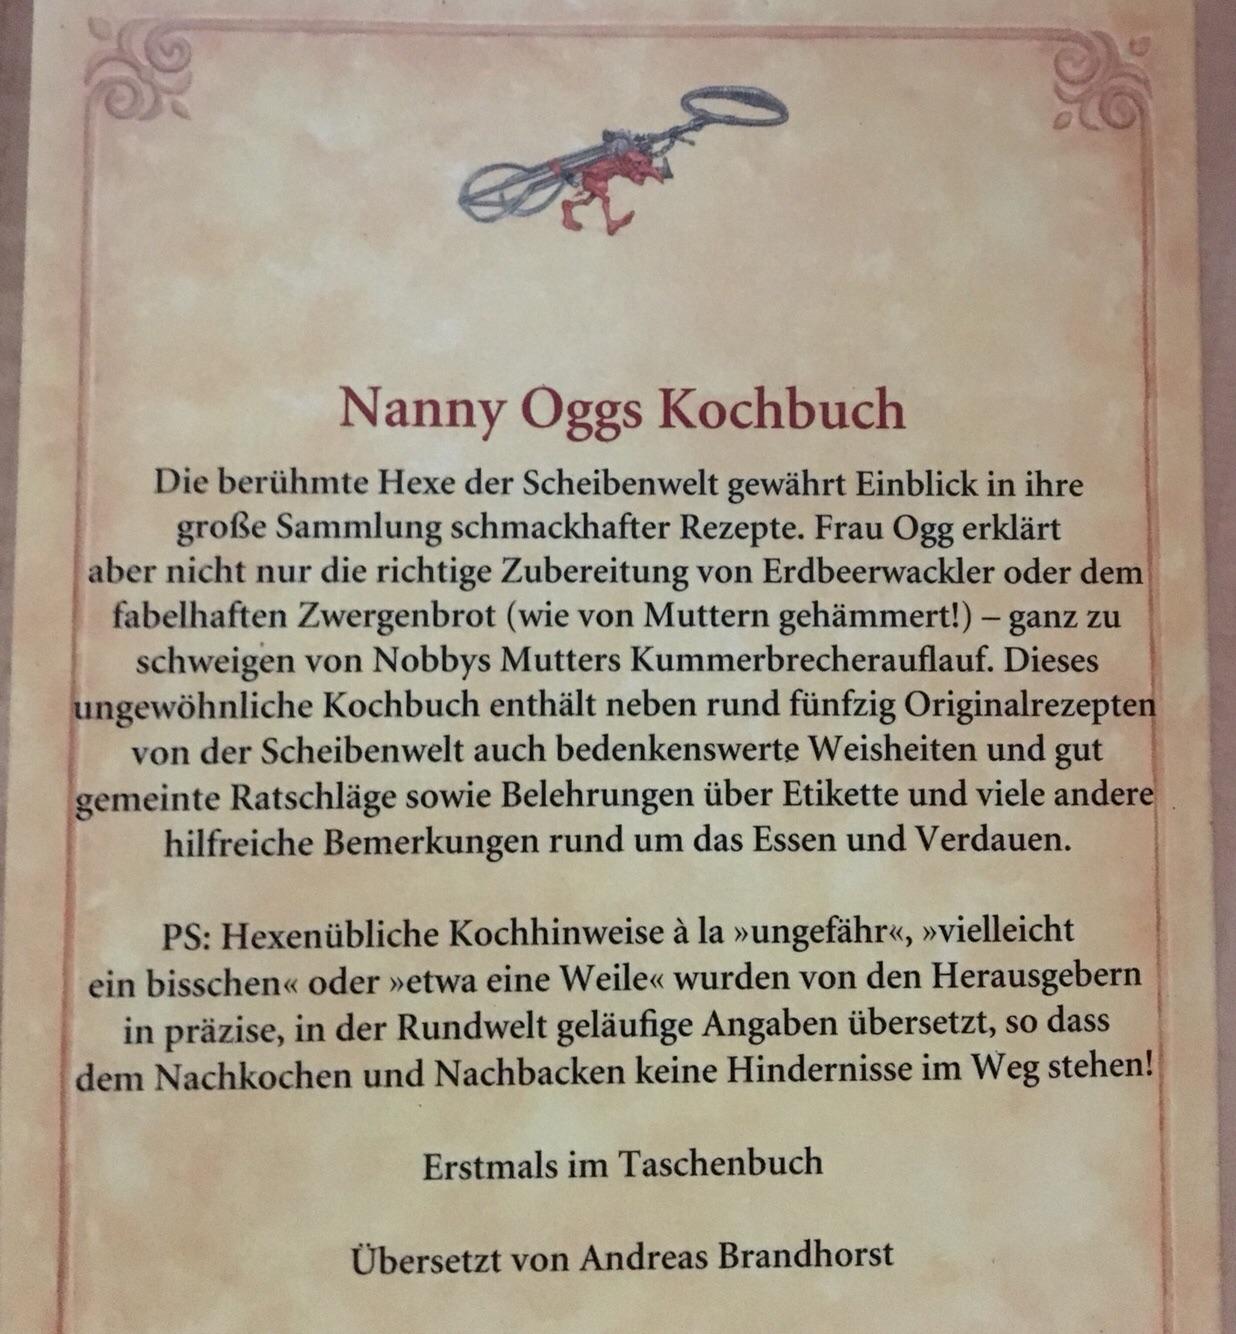 Nanny Oggs Kochbuch In 90537 Feucht For 5 50 For Sale Shpock